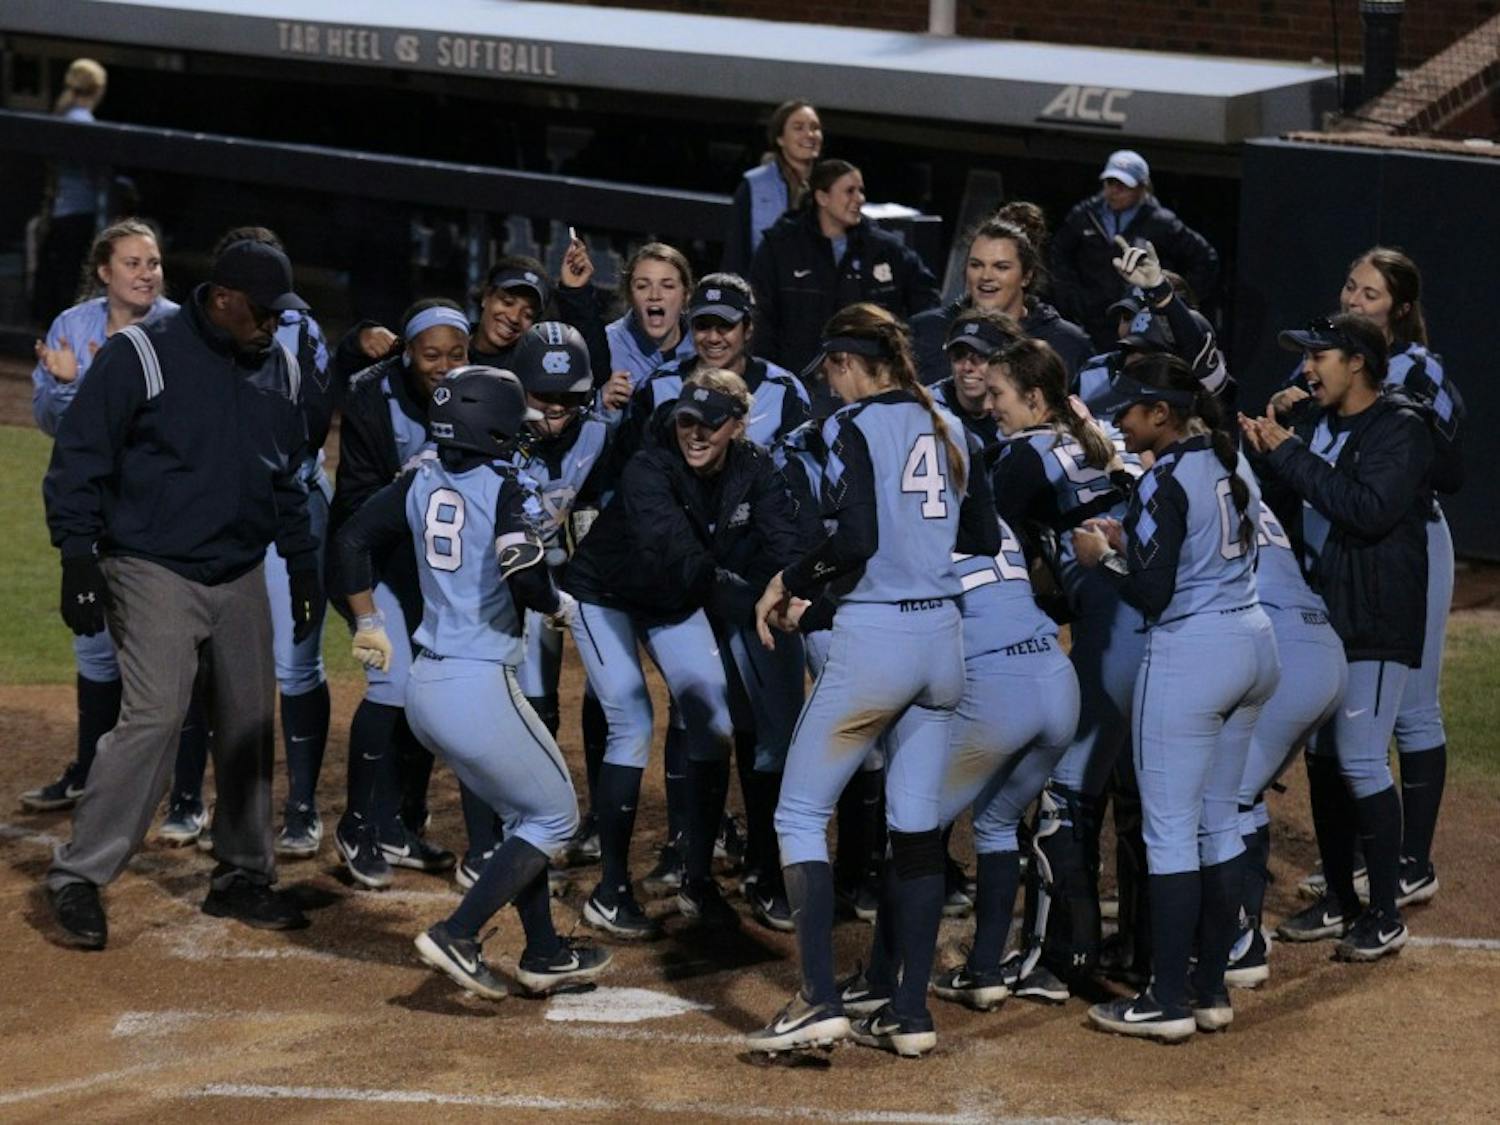 The UNC women's softball team welcomes junior outfielder Kiani Ramsey (8) to the home plate after she hit a home-run during UNC's 11-5 win over Maryland at Anderson Stadium on Sat. March 2, 2019.